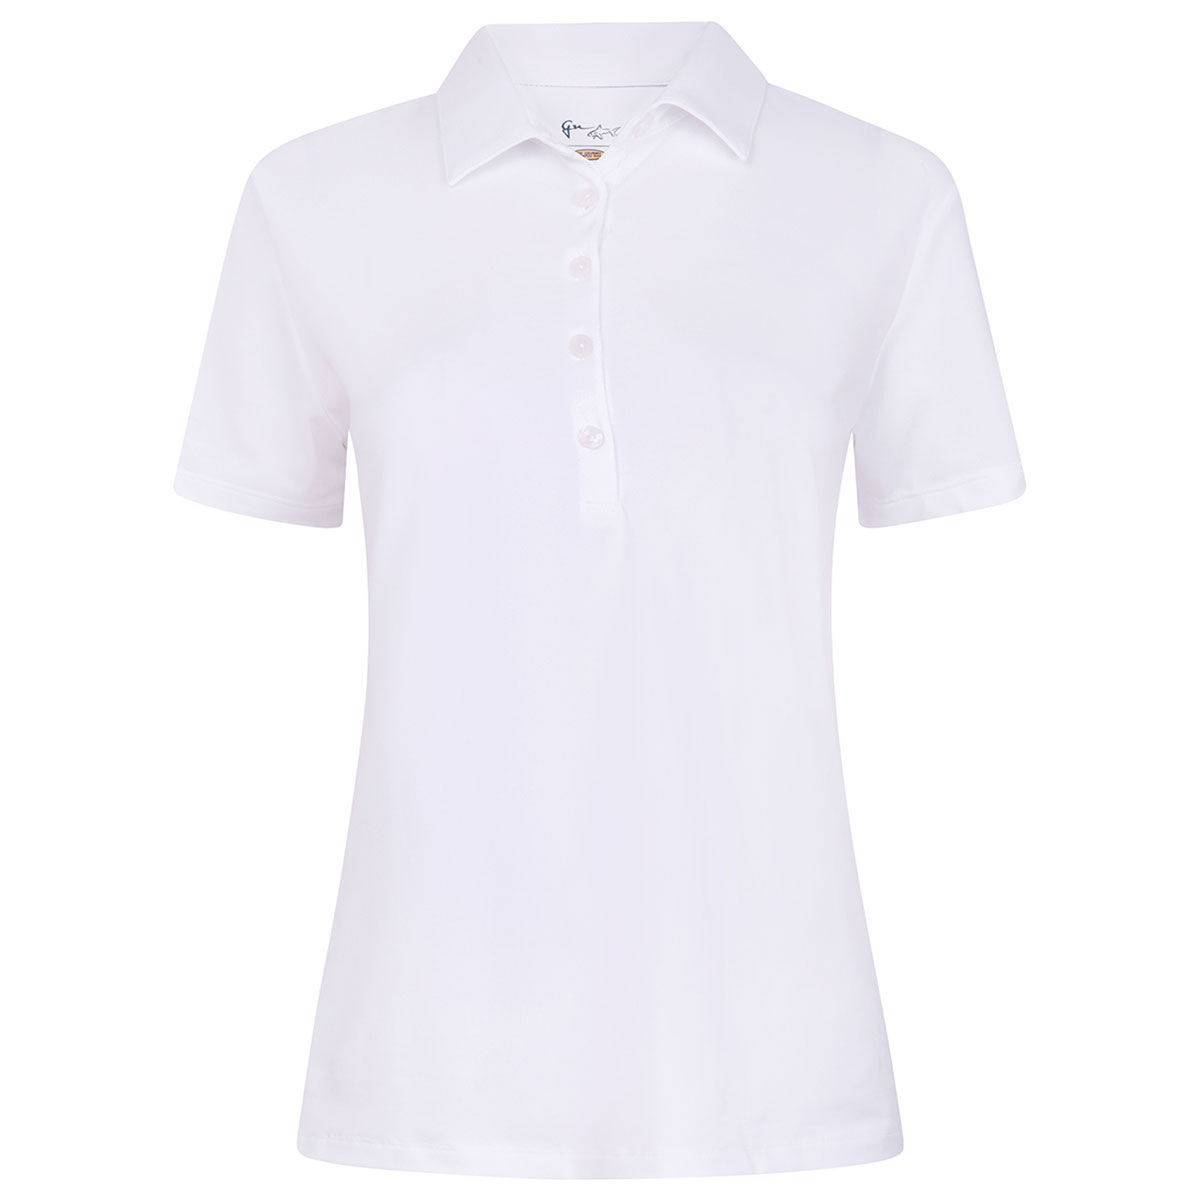 Greg Norman White Embroidered Freedom Pique Golf Polo Shirt, Womens | American Golf, Size: Small von Greg Norman